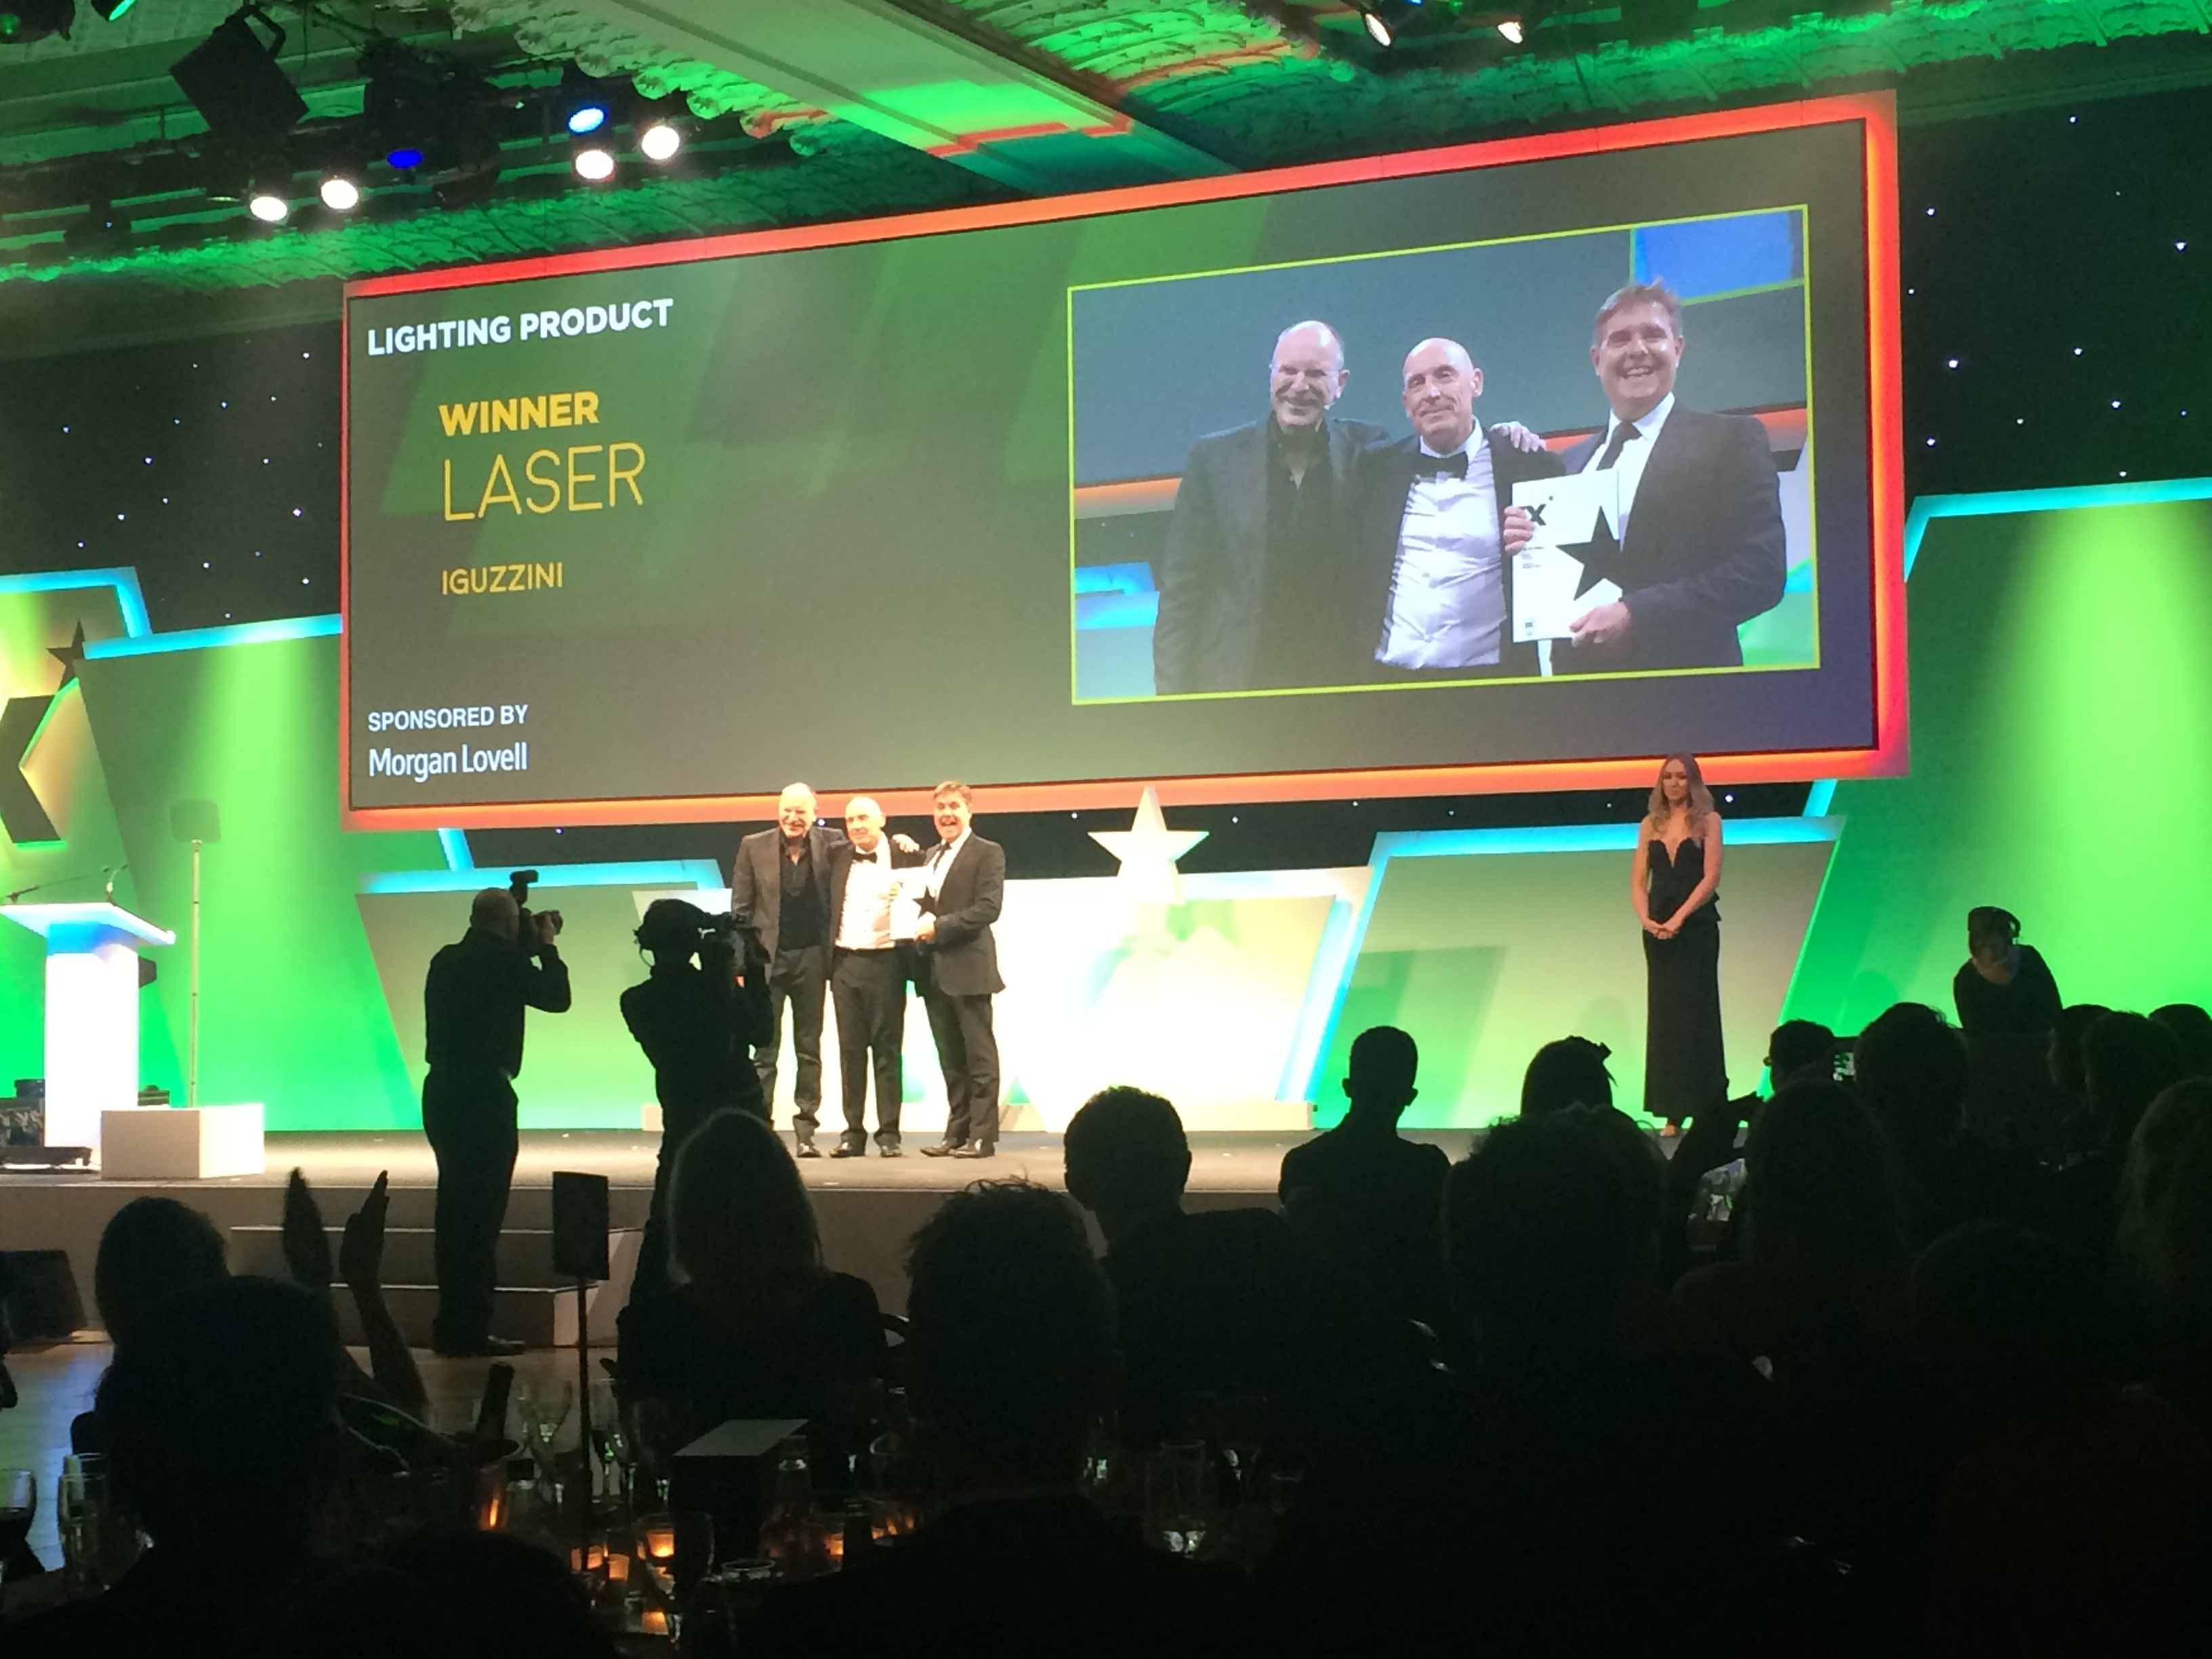 Laser won the Lighting Product category at the 2016 edition of the FX Awards